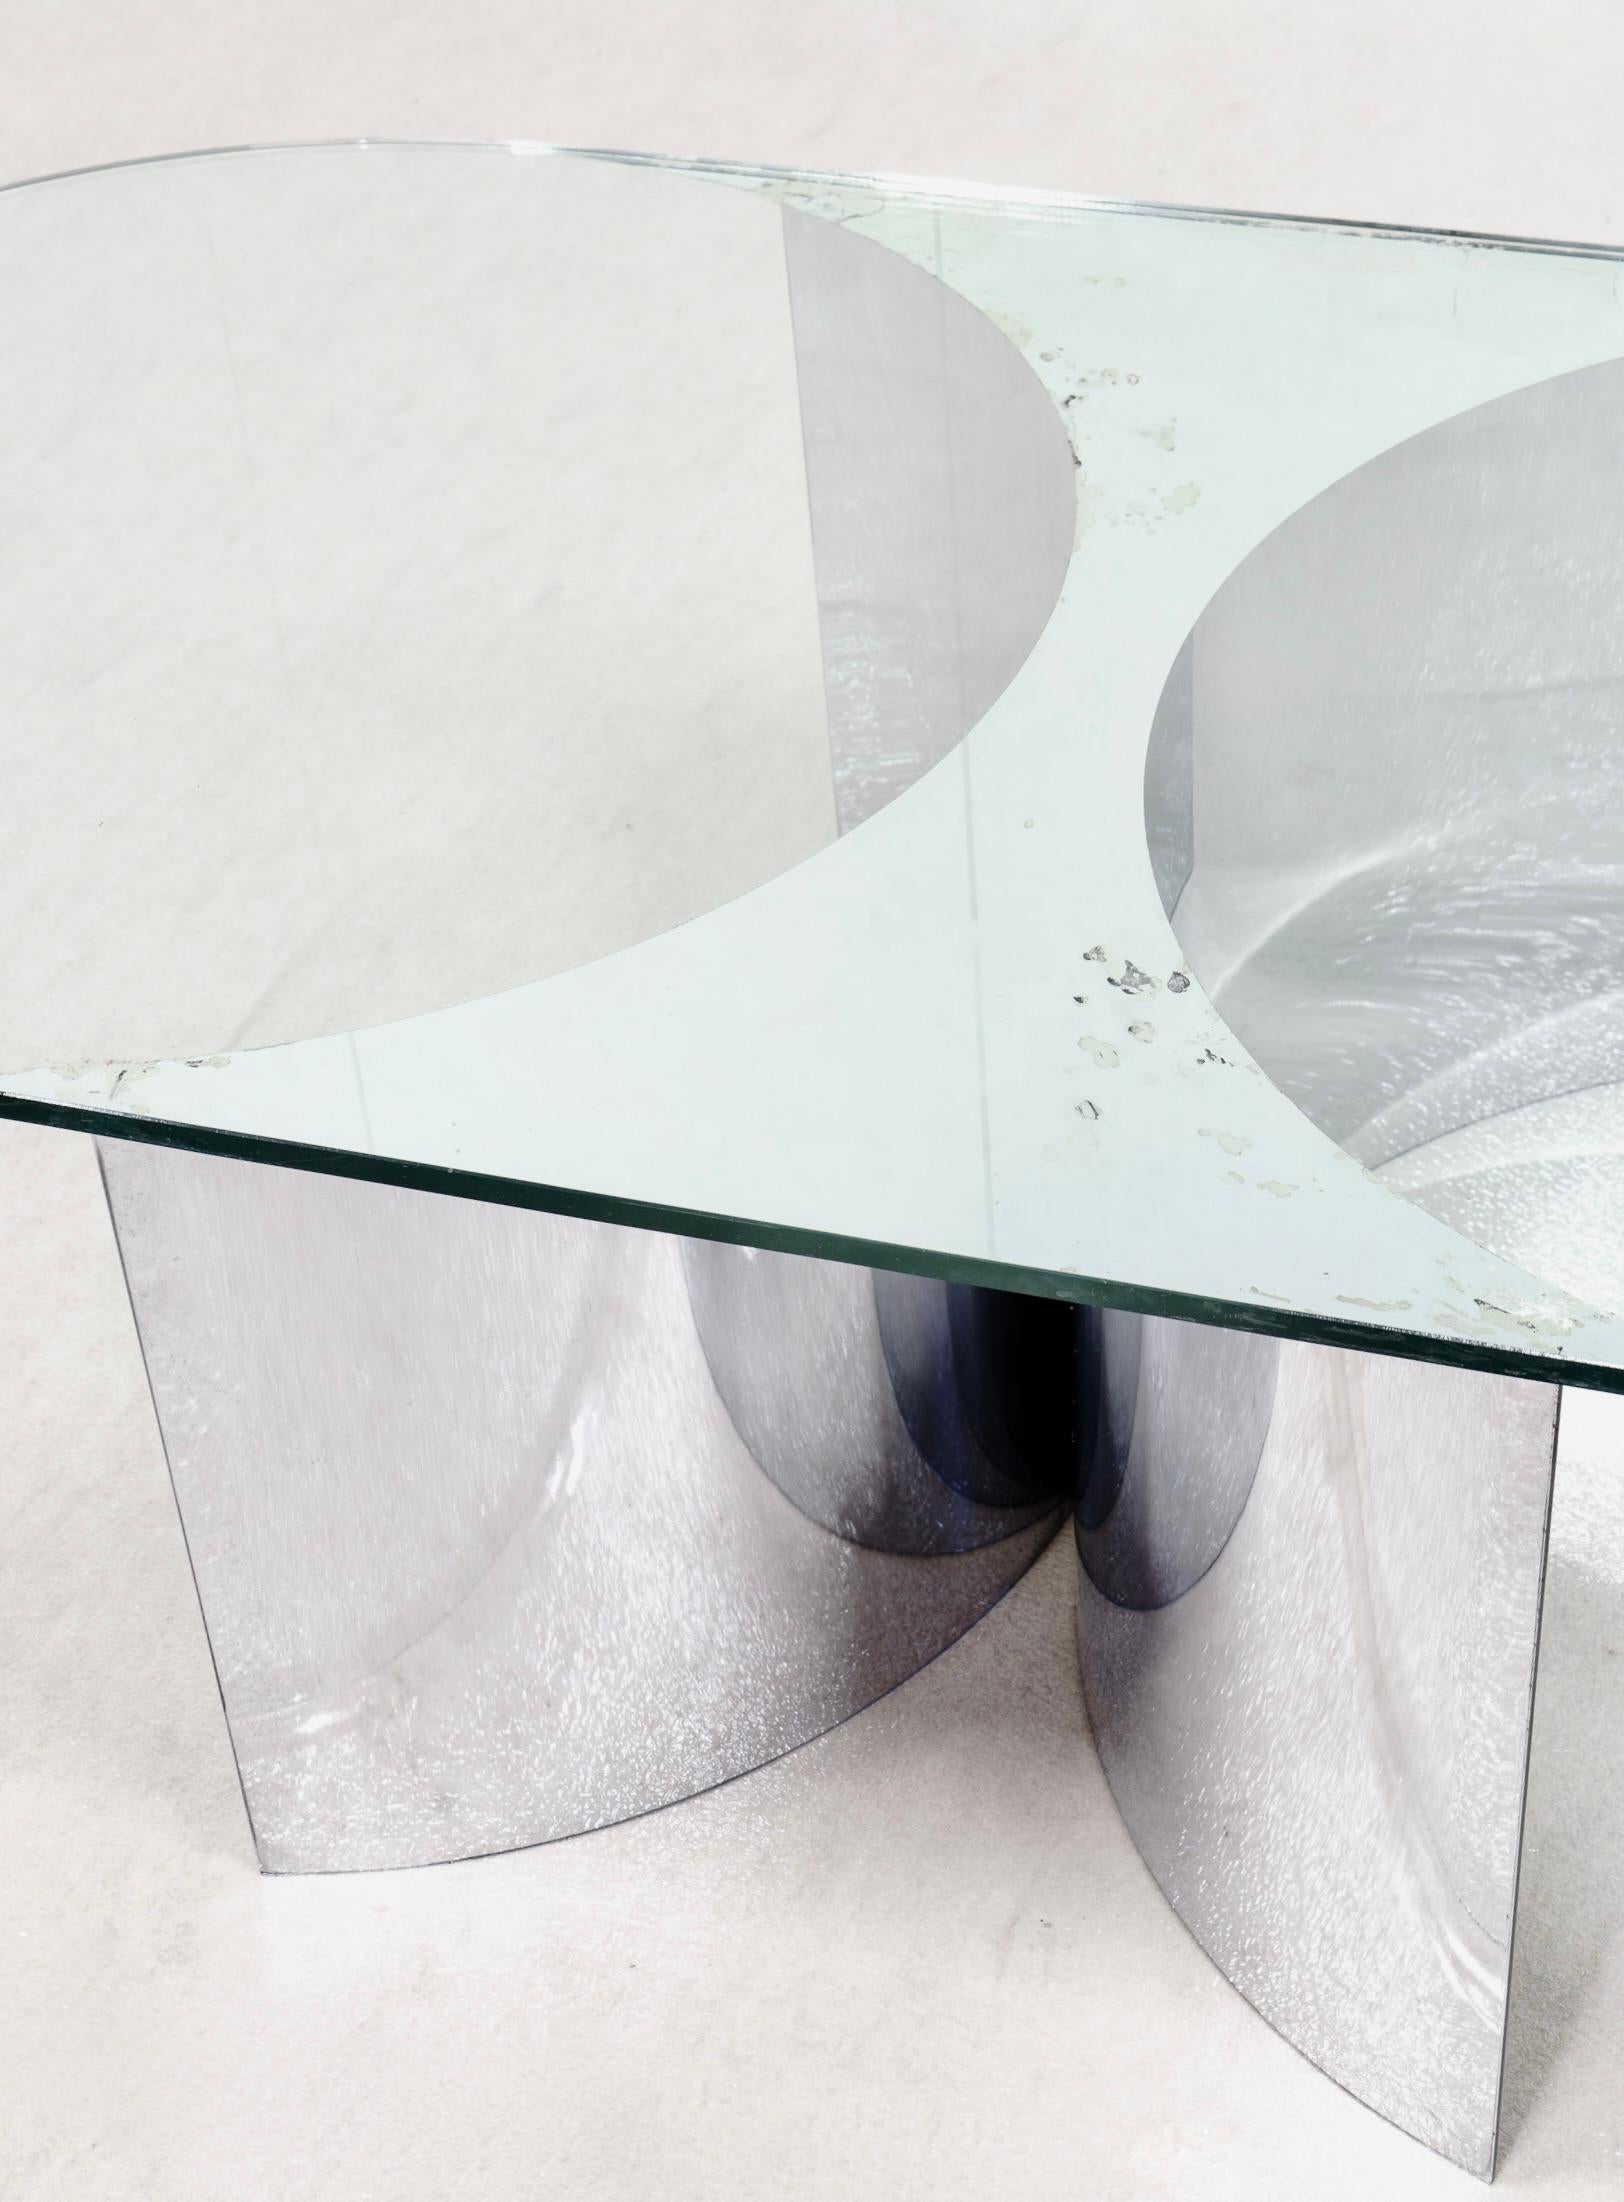 A large coffee table from Giuseppe Raimondi, model Jorn 3102 with a concave base in chromed steel. Rounded glass top decorated with glass semicircles. Italy 70s.